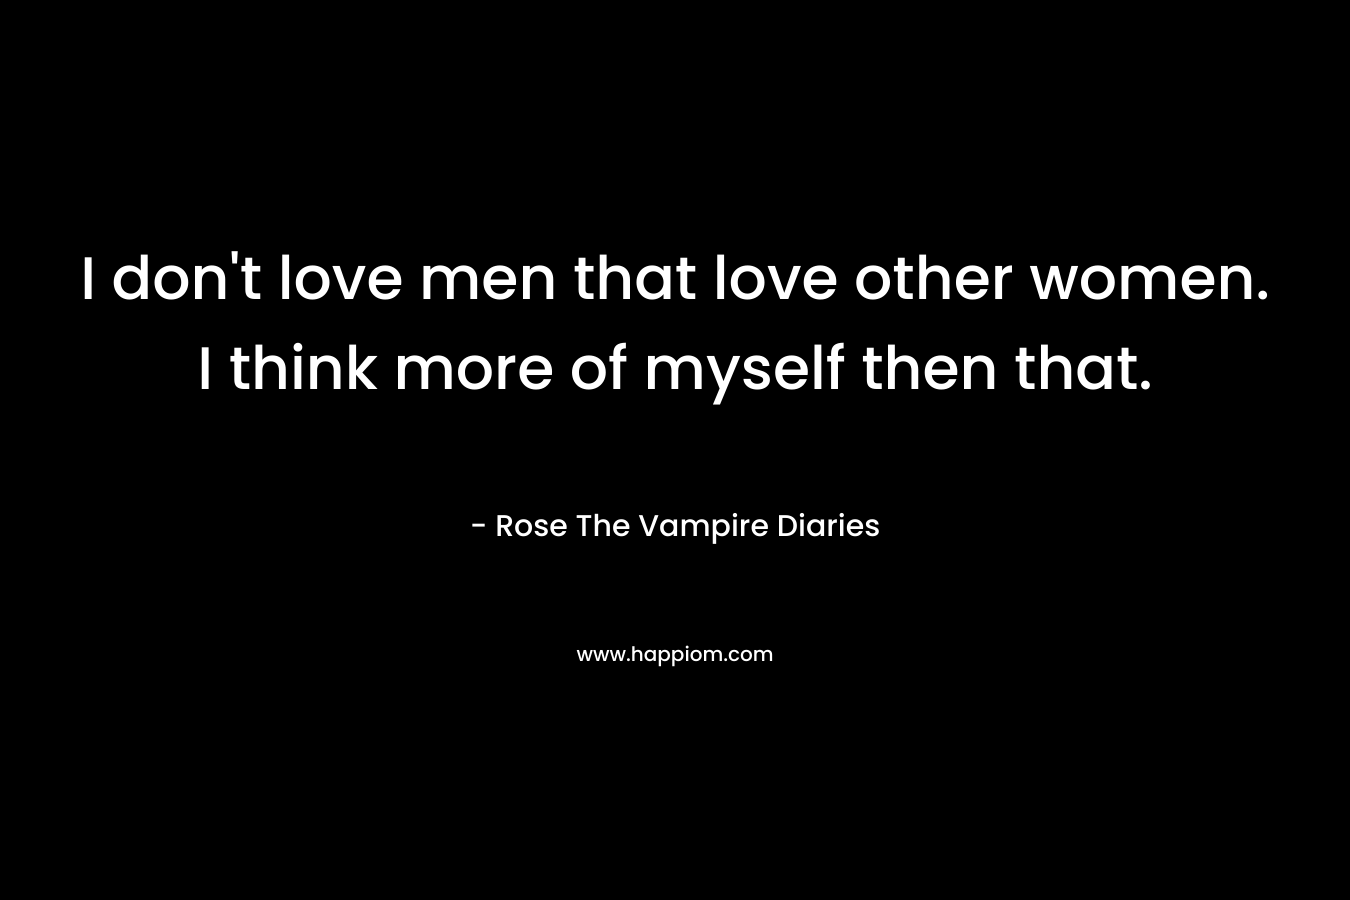 I don't love men that love other women. I think more of myself then that.